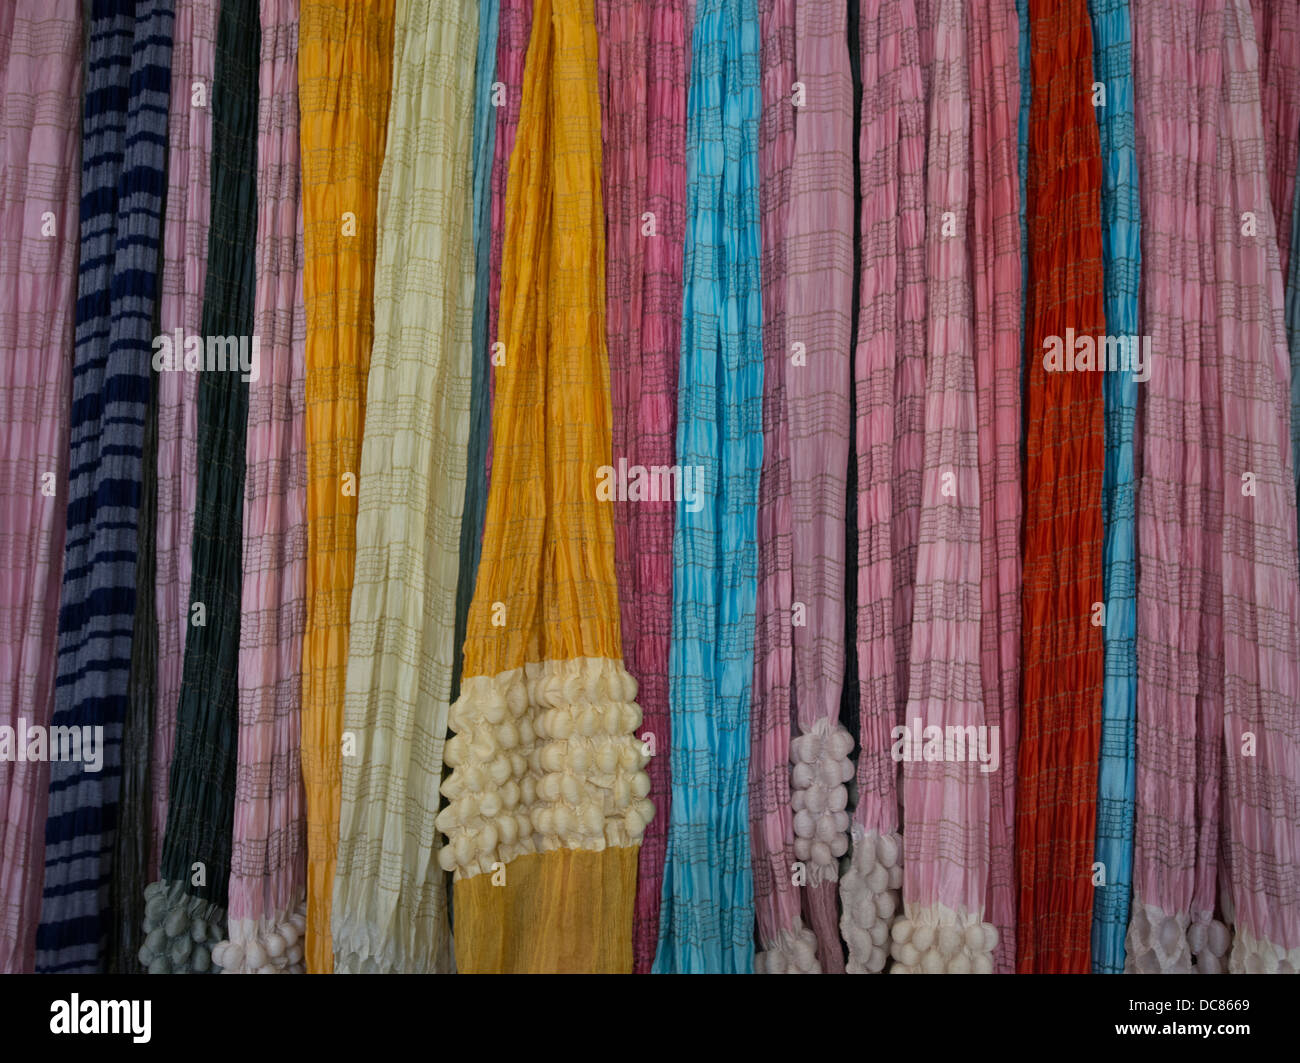 Saris, pashminas, shawls and scarfs made of silk, cashmere, and wool on sale in Varanasi India Stock Photo